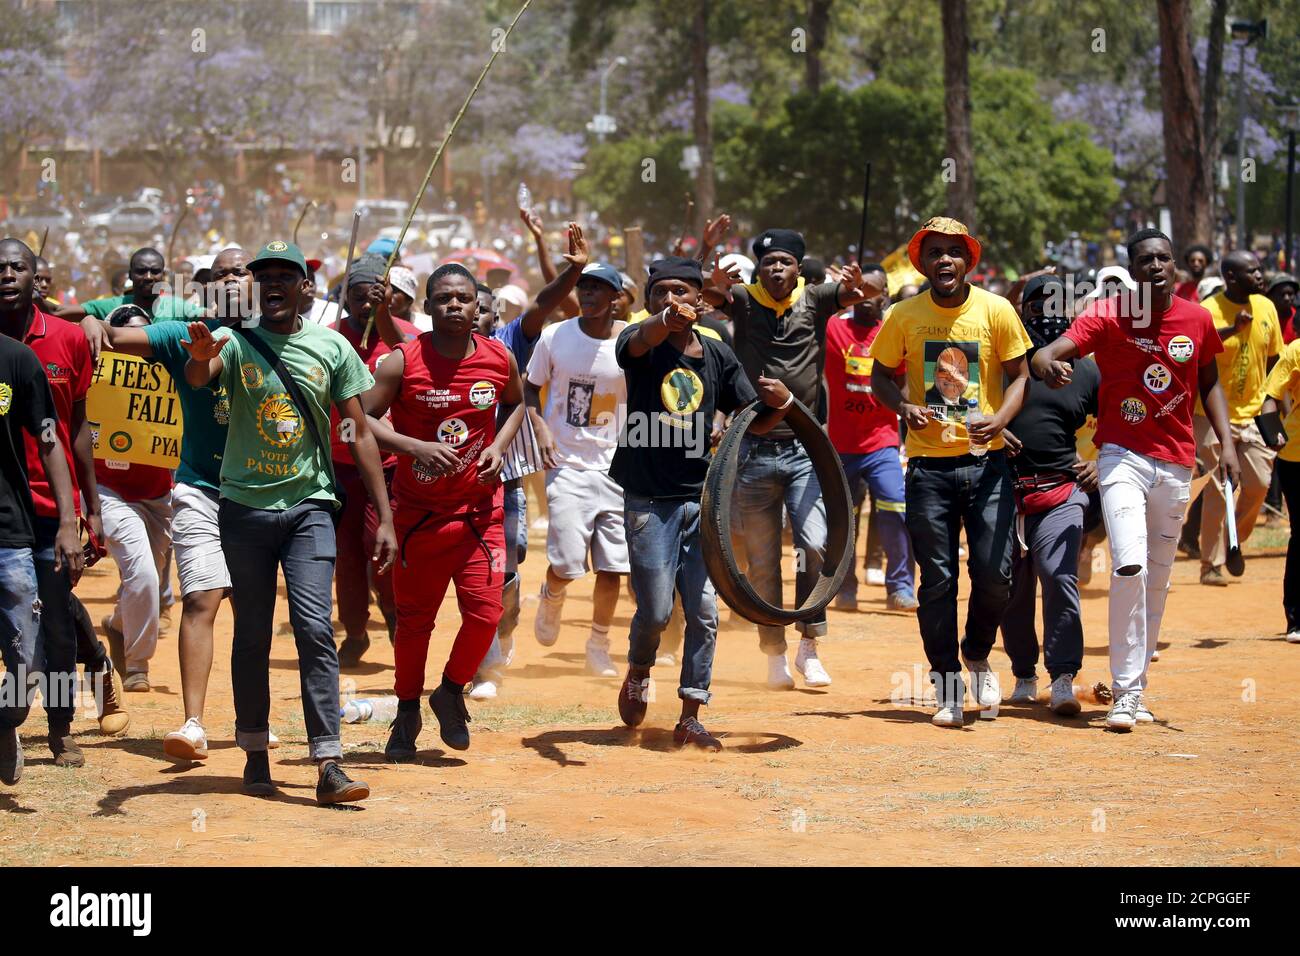 Demonstrators gesture at a photographer during a protest over planned increases in tuition fees outside the Union building in Pretoria, South Africa October 23, 2015. South police fired stun grenades at